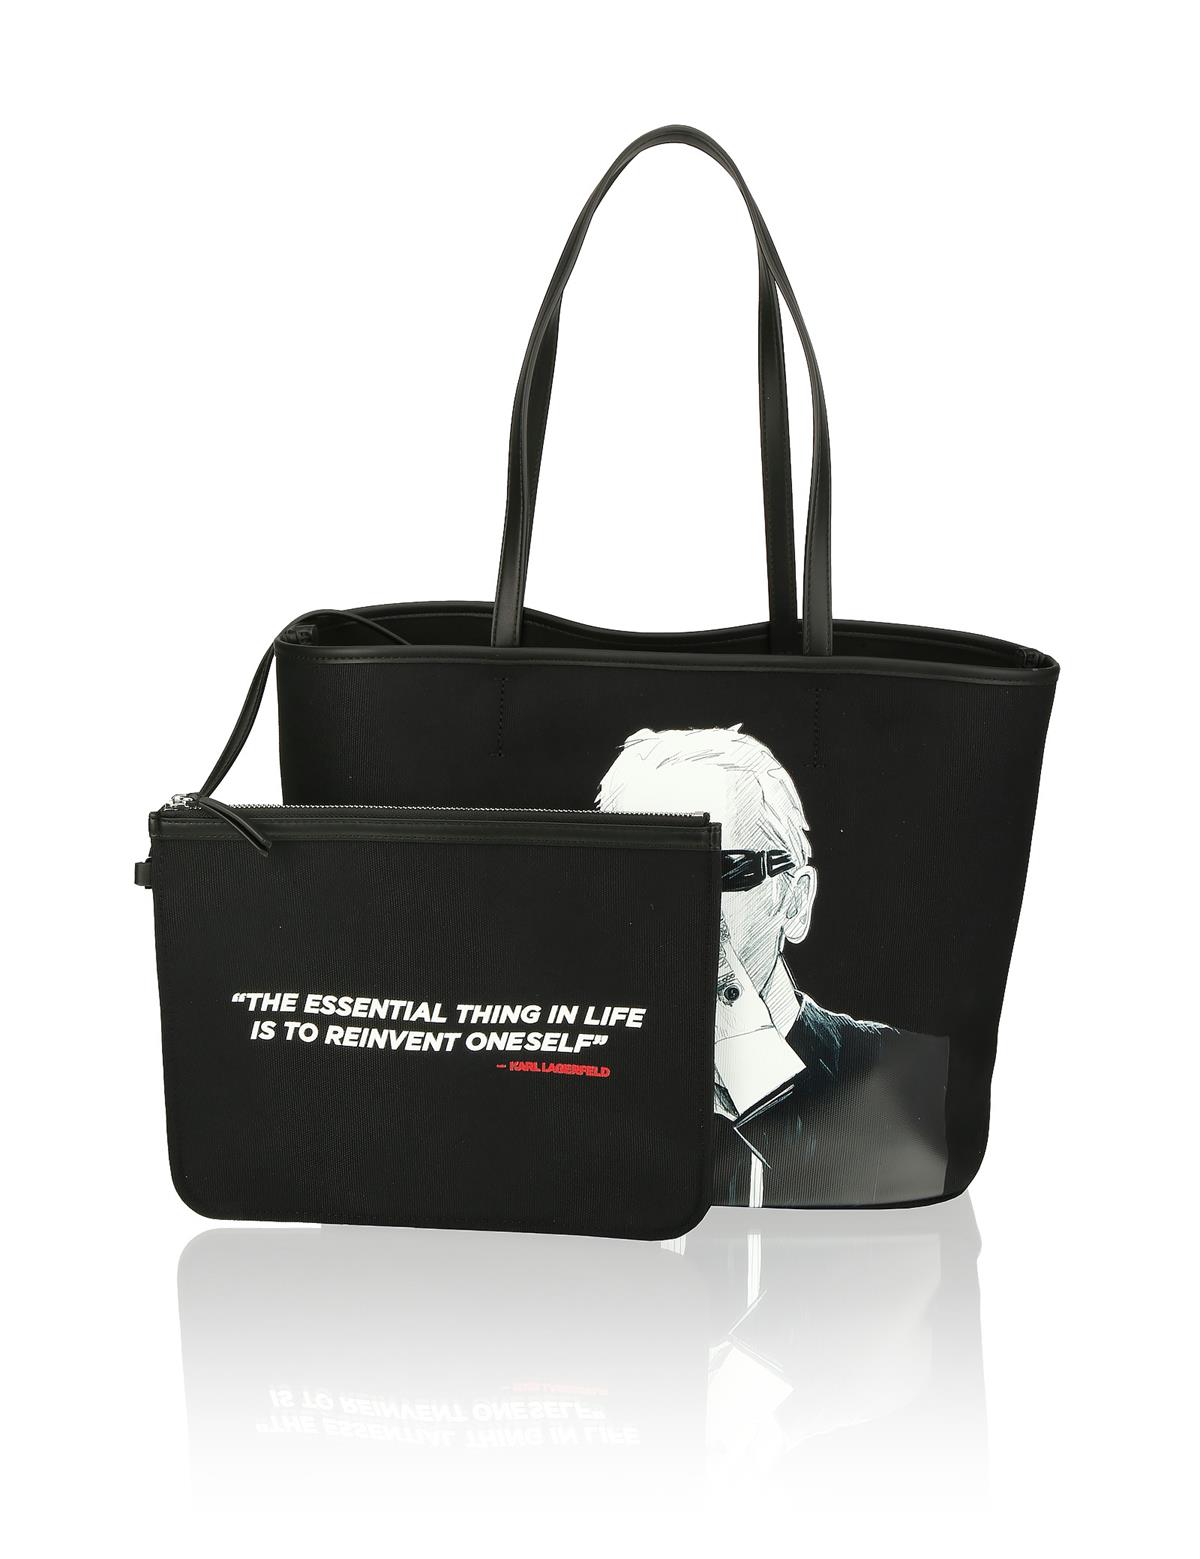 HUMANIC 82 Karl Lagerfeld Canvas Tote EUR 175 6131332670